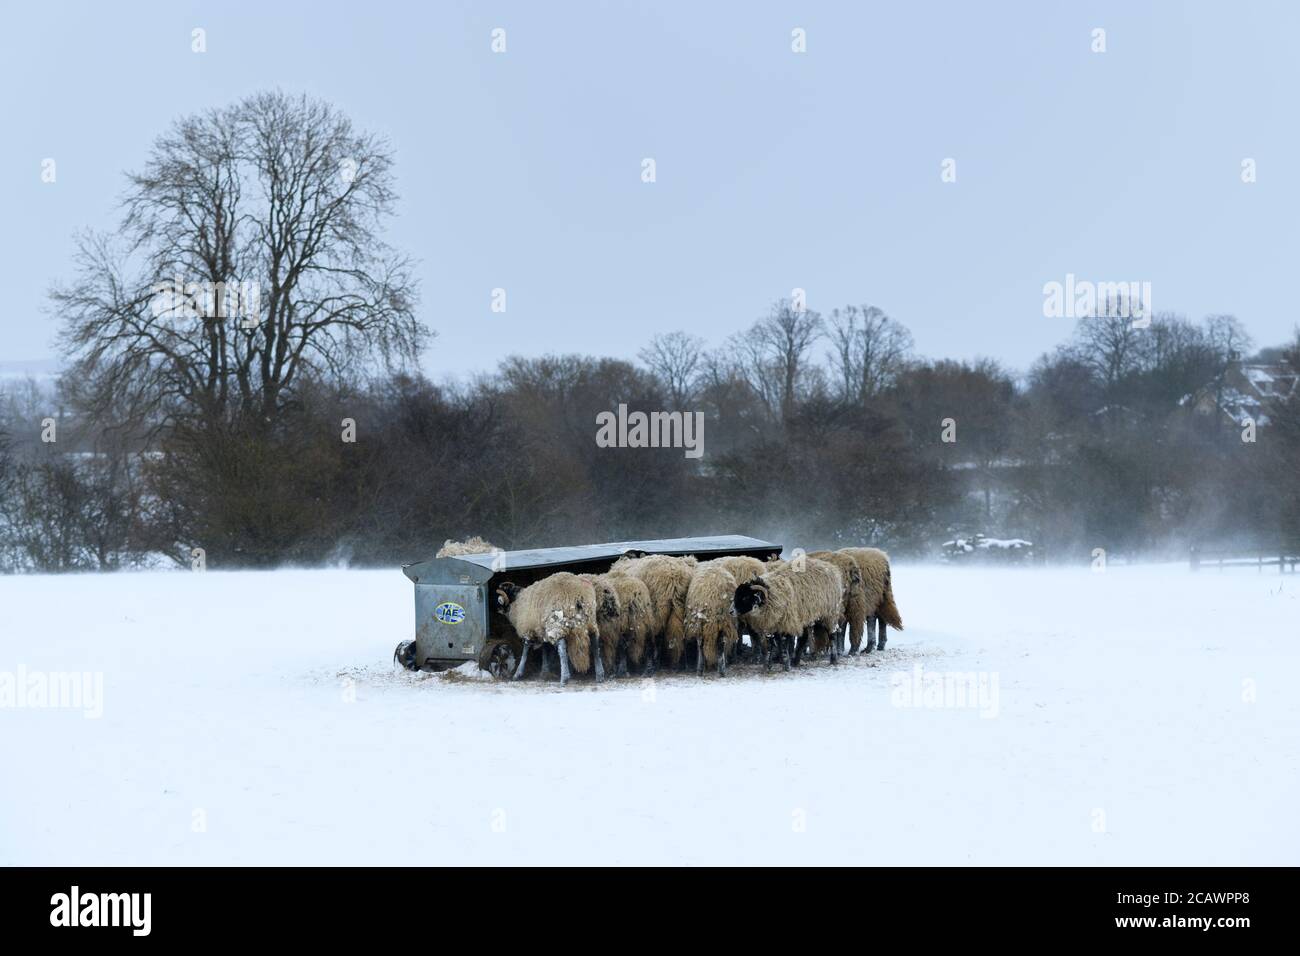 Cold snowy winter day & hungry sheep standing in snow (exposed windswept field) gathered round hayrack eating hay - Ilkley Moor, Yorkshire England UK. Stock Photo